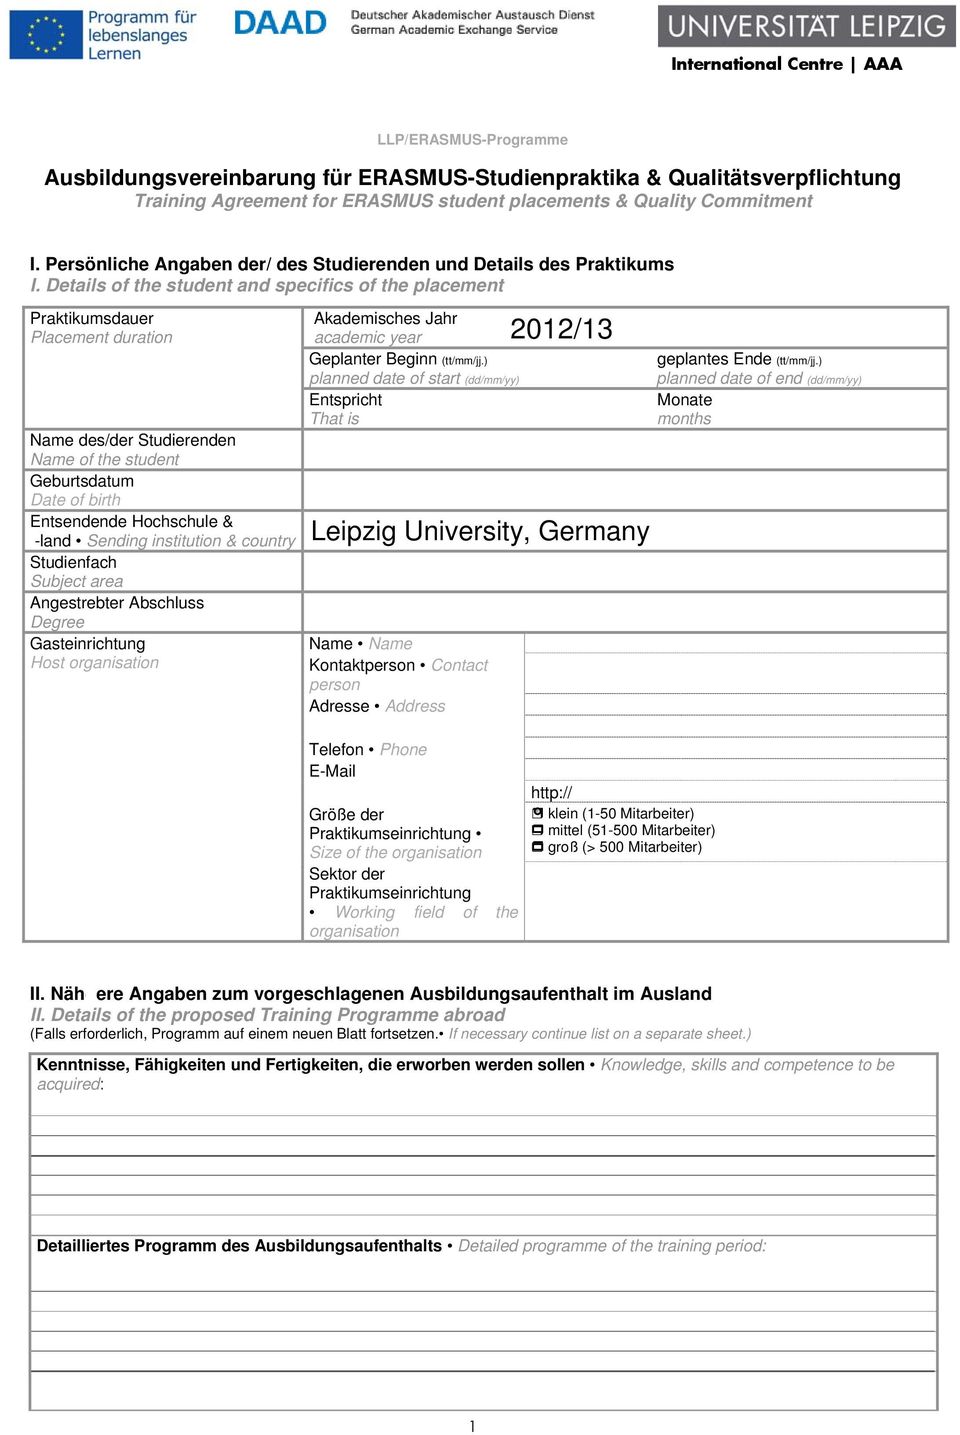 Details of the student and specifics of the placement Praktikumsdauer Placement duration Name des/der Studierenden Name of the student Geburtsdatum Date of birth Entsendende Hochschule & -land